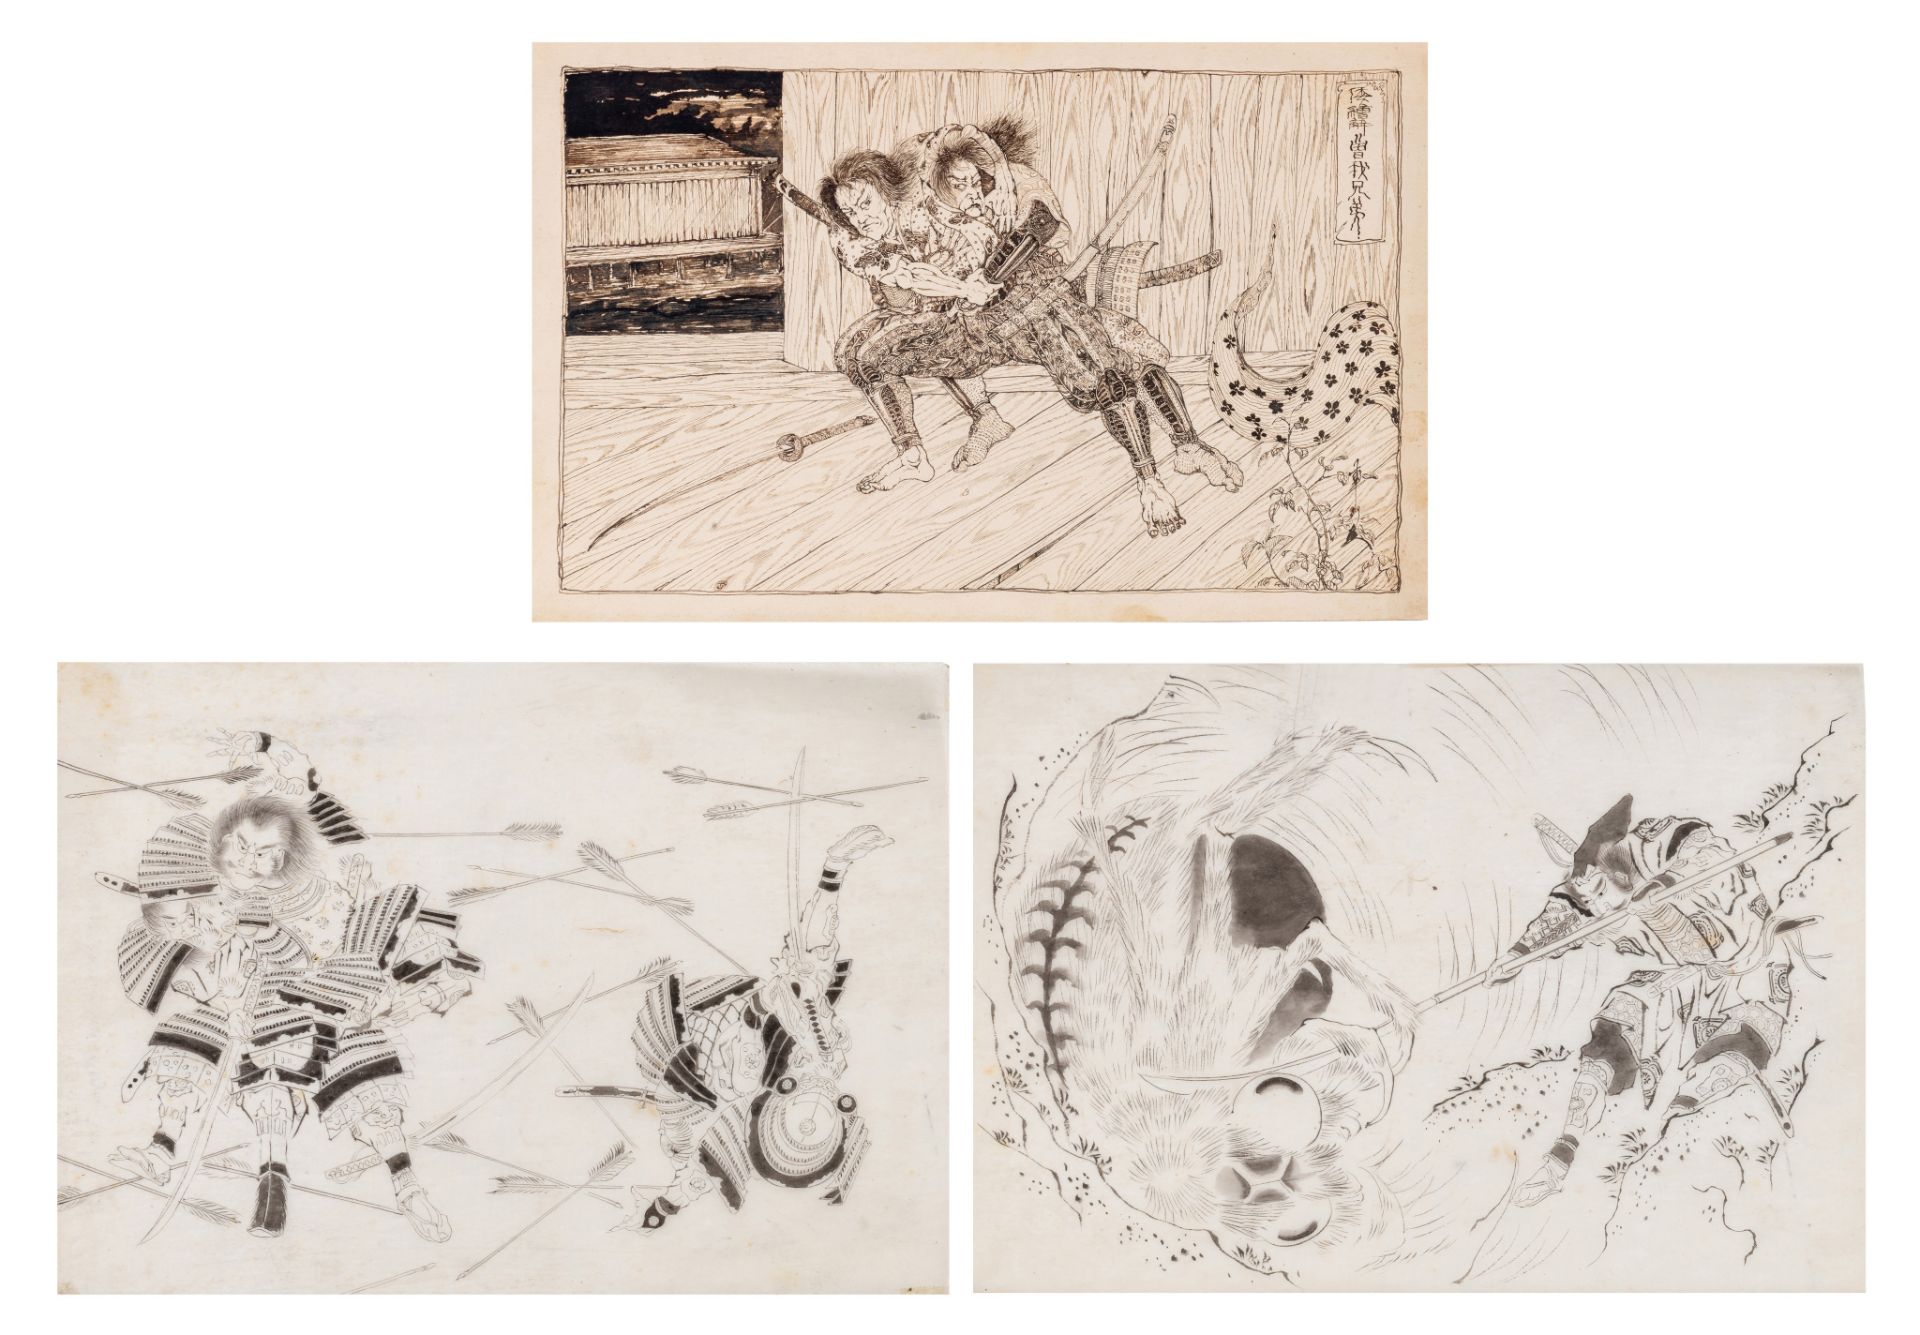 Drawing for a woodblock print with a fighting scene, chuban format, 19 x 30 cm